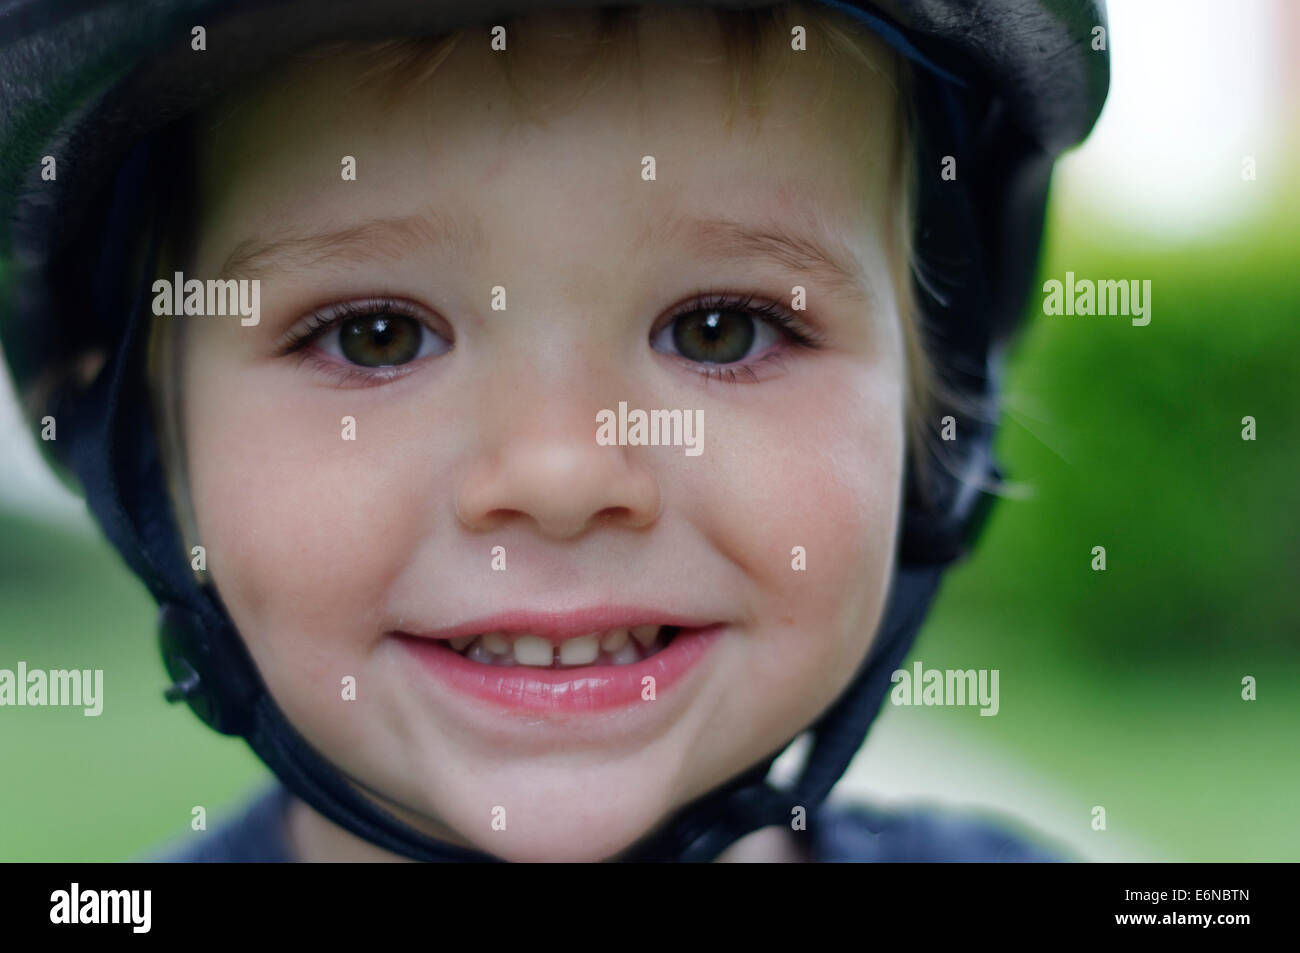 A portrait of a beautiful young boy wearing a cycle helmet Stock Photo